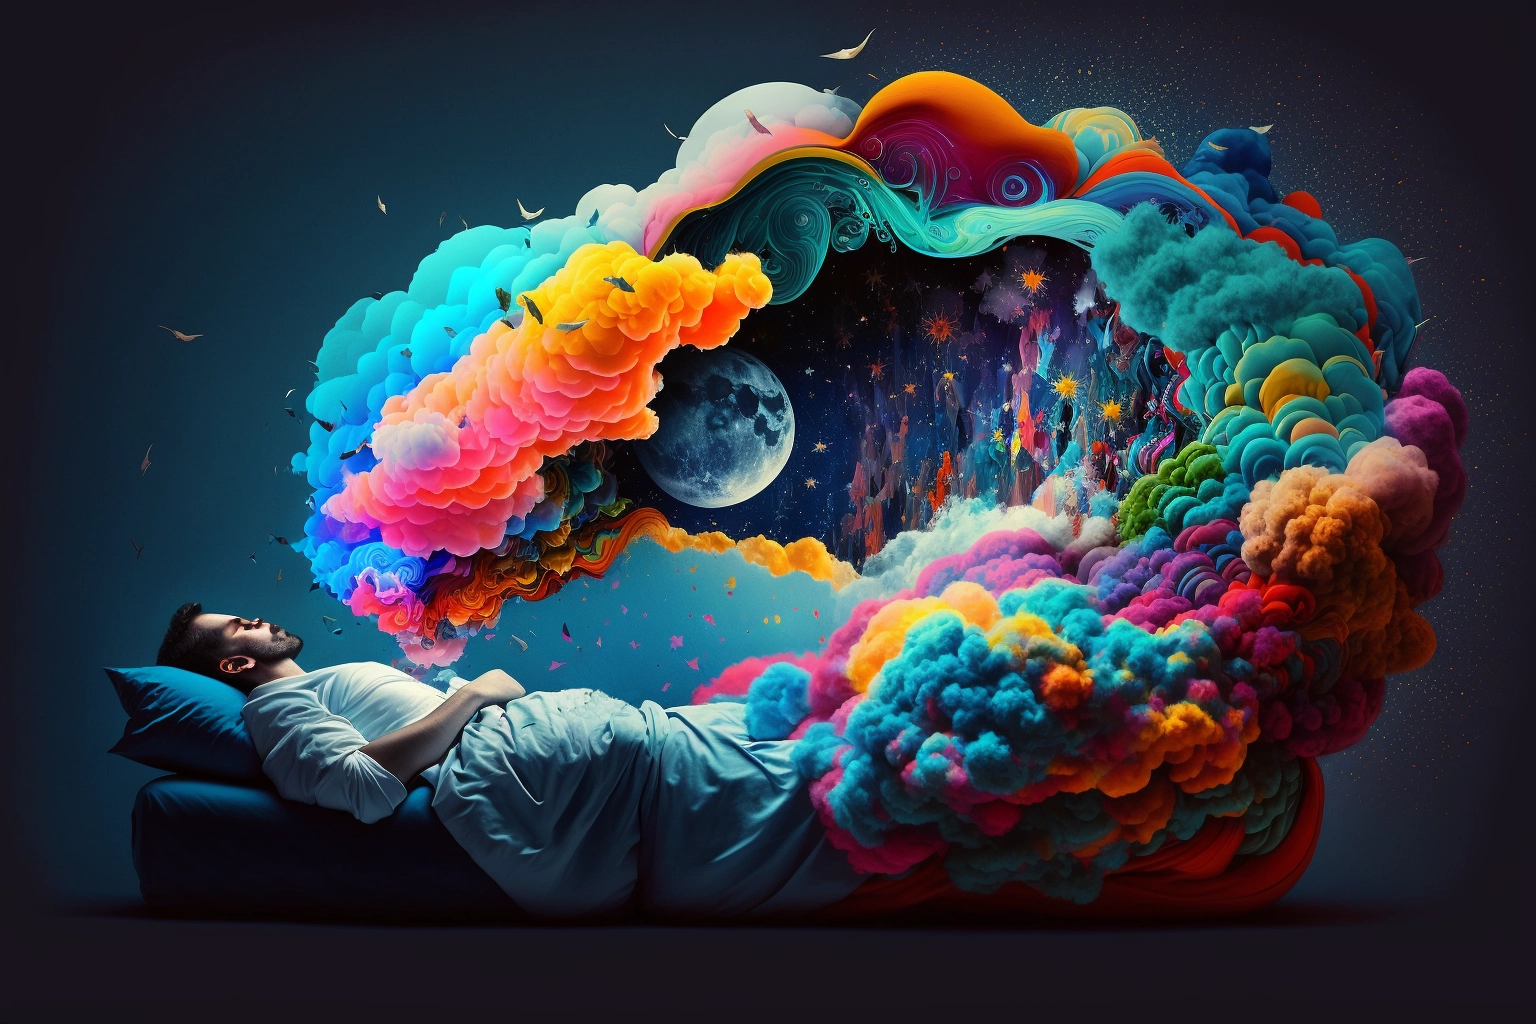 Man in bed having a very colorful dream